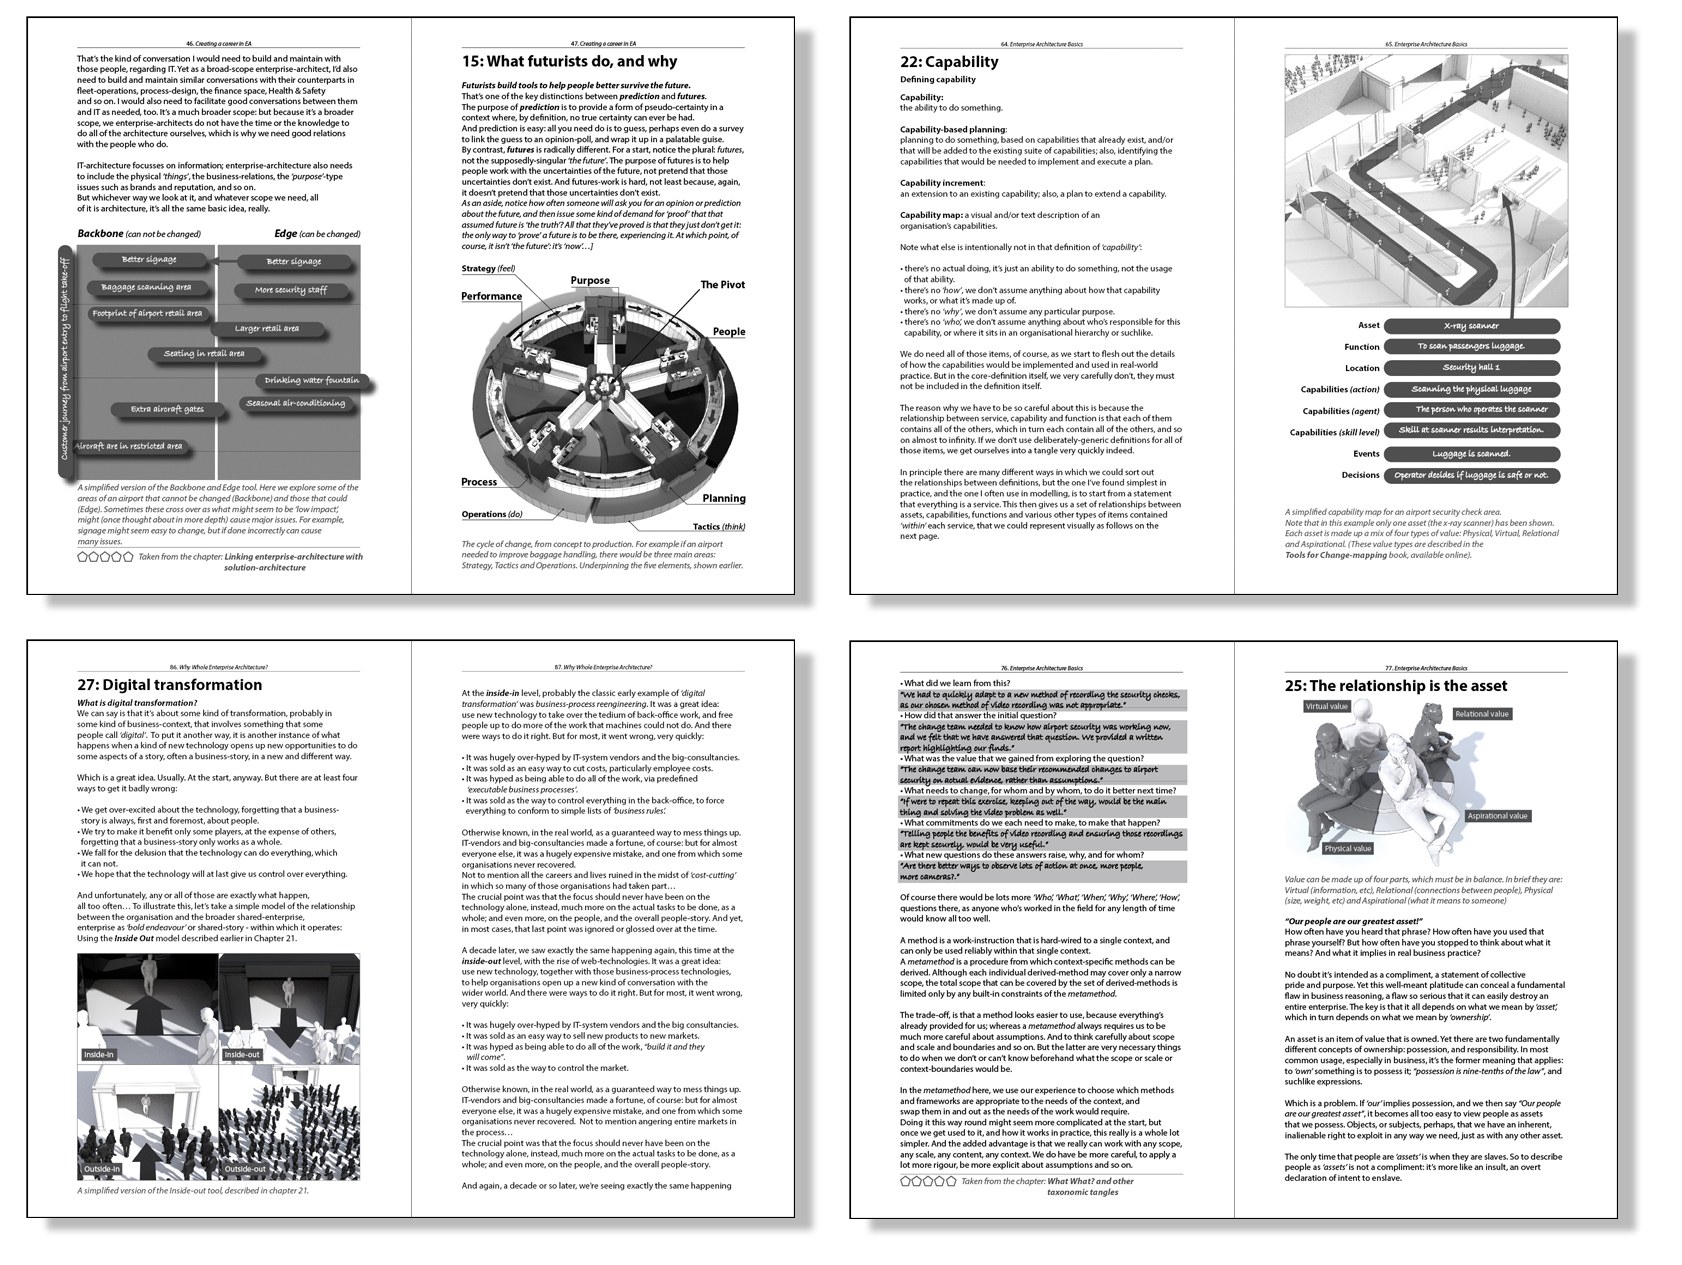 PAGE SPREADS OF THE WHOLE EA BOOK BY TOM GRAVES